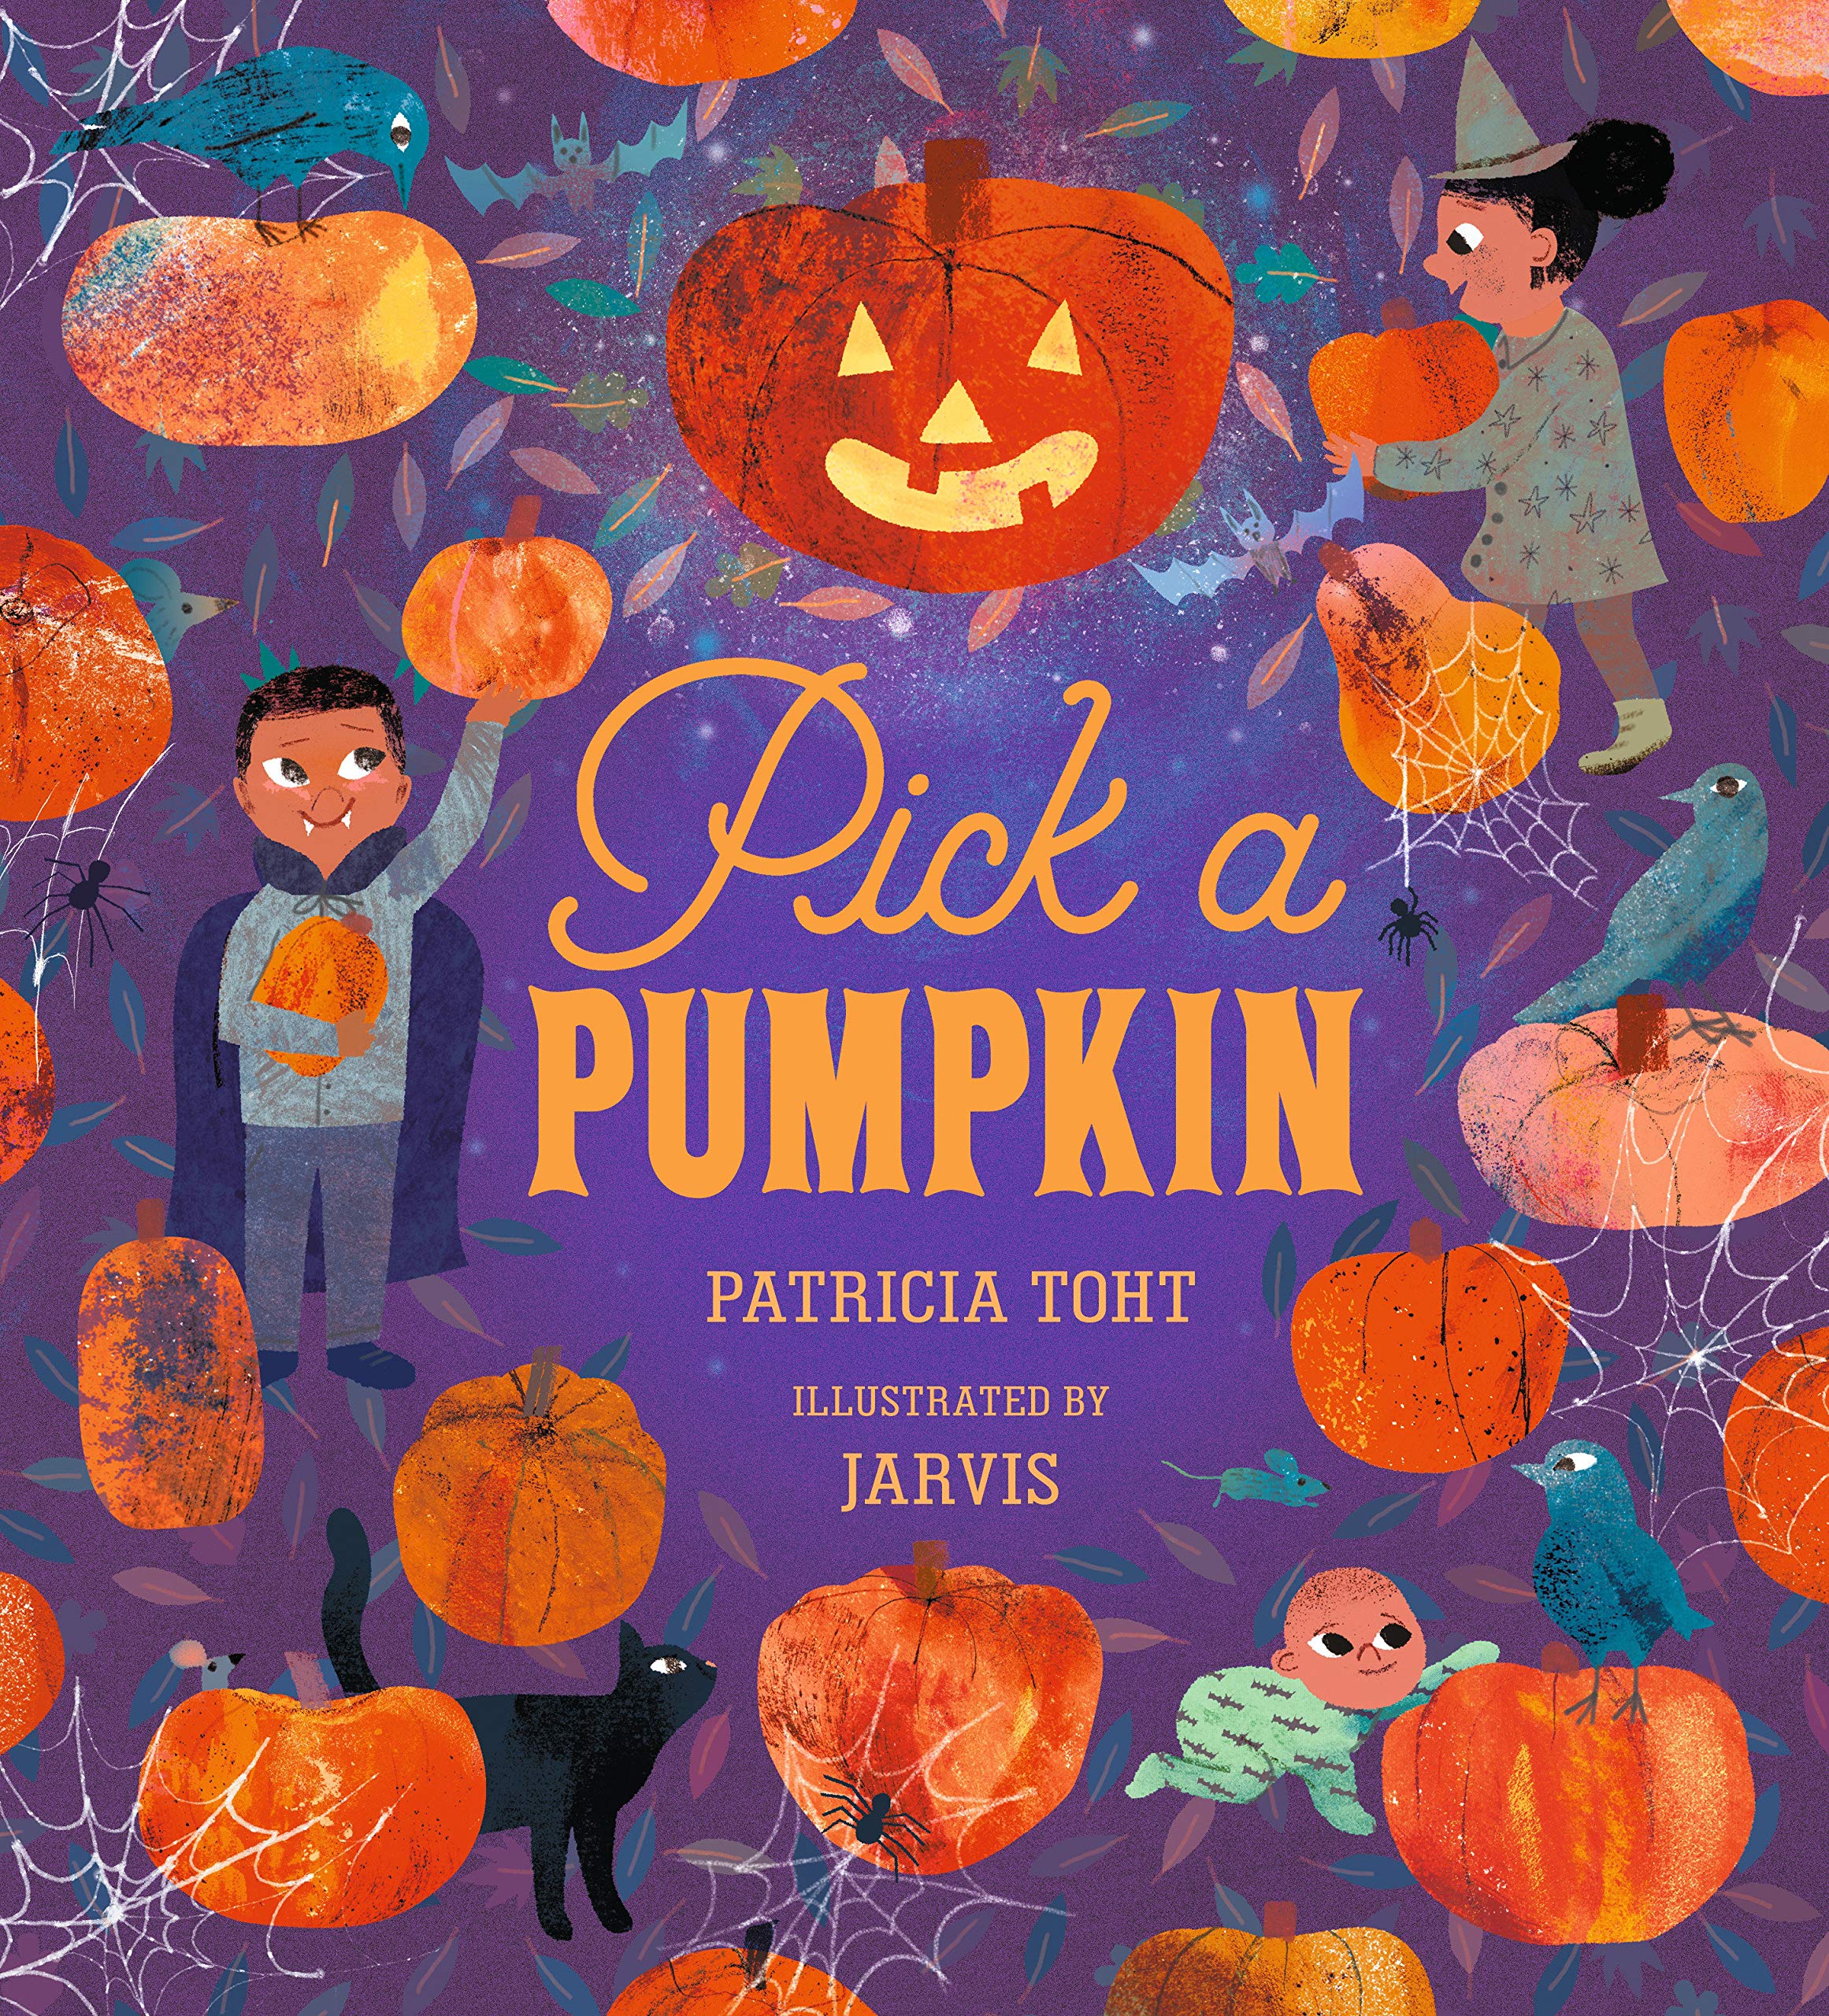 speech and language teaching concepts for pick a pumpkin in speech therapy